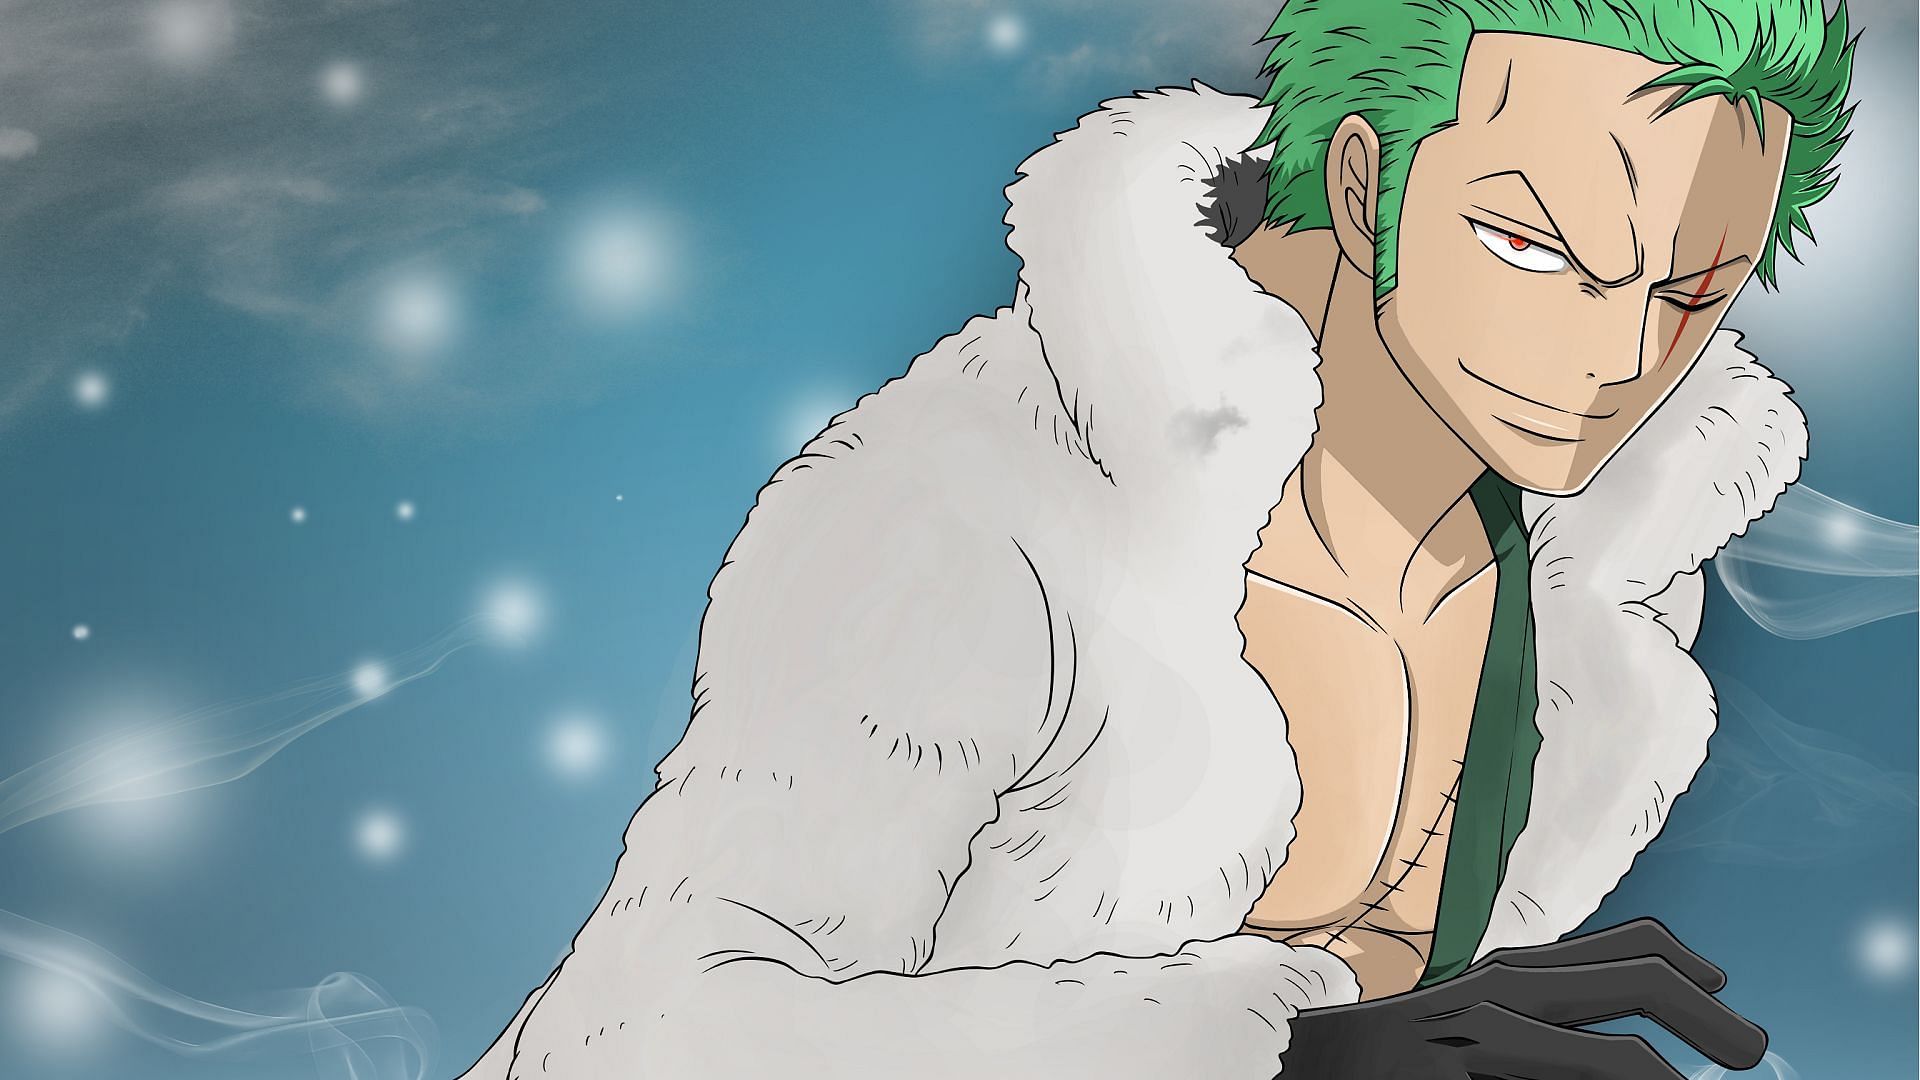 Zoro in his Punk Hazard outfit (Image via Toei Animation, One Piece)